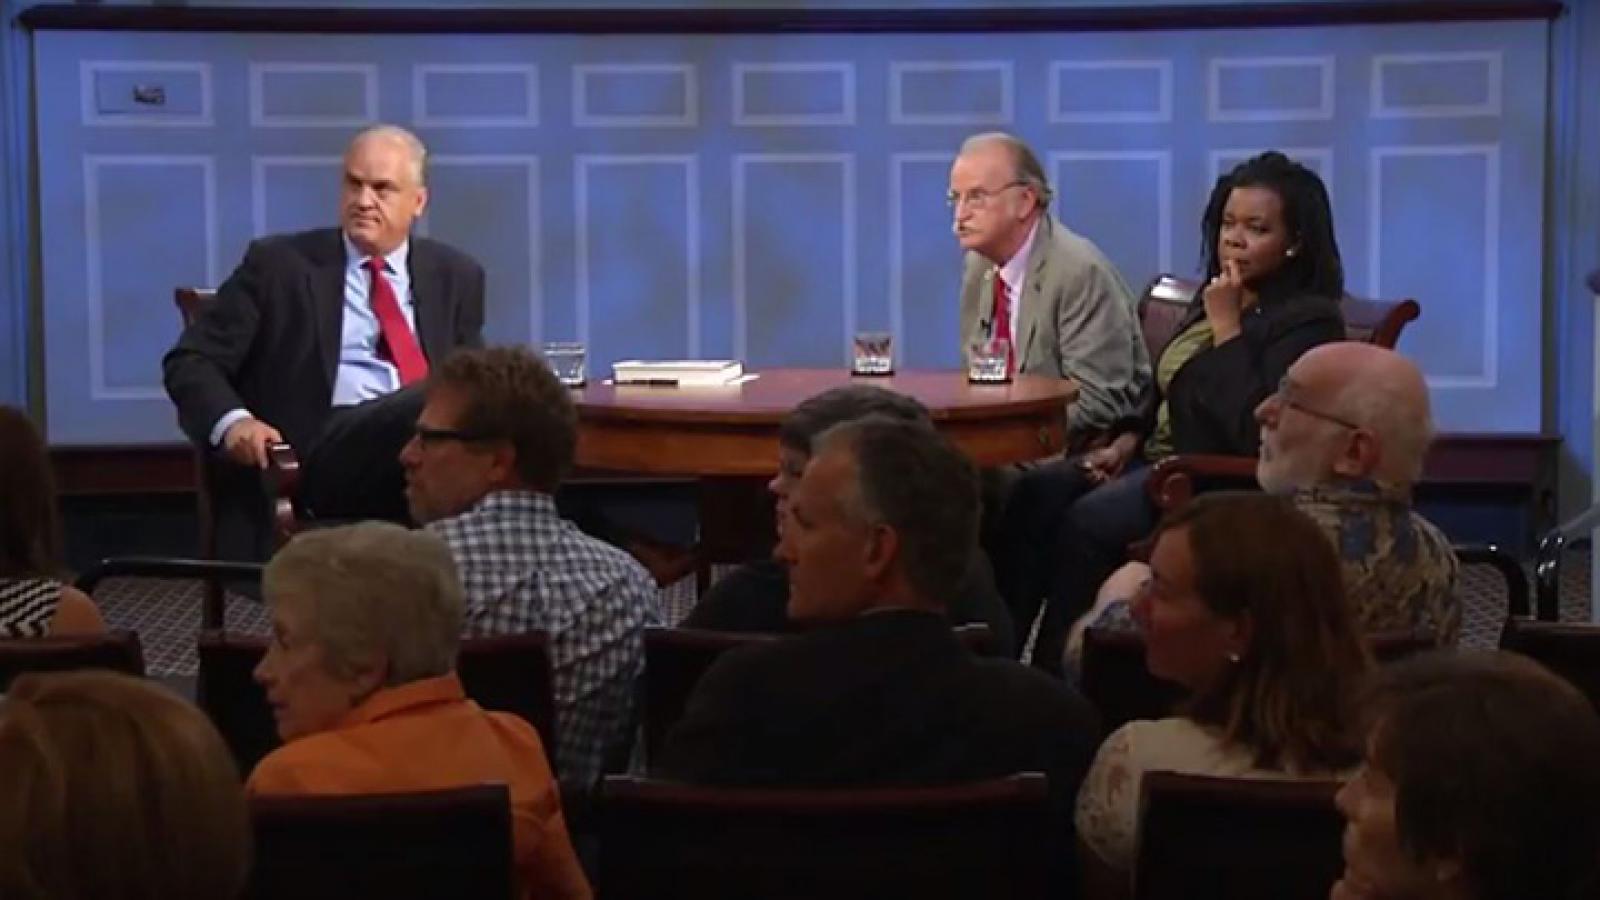 Peter Onuf and Annette Gordon-Reed take questions from the American Forum studio audience